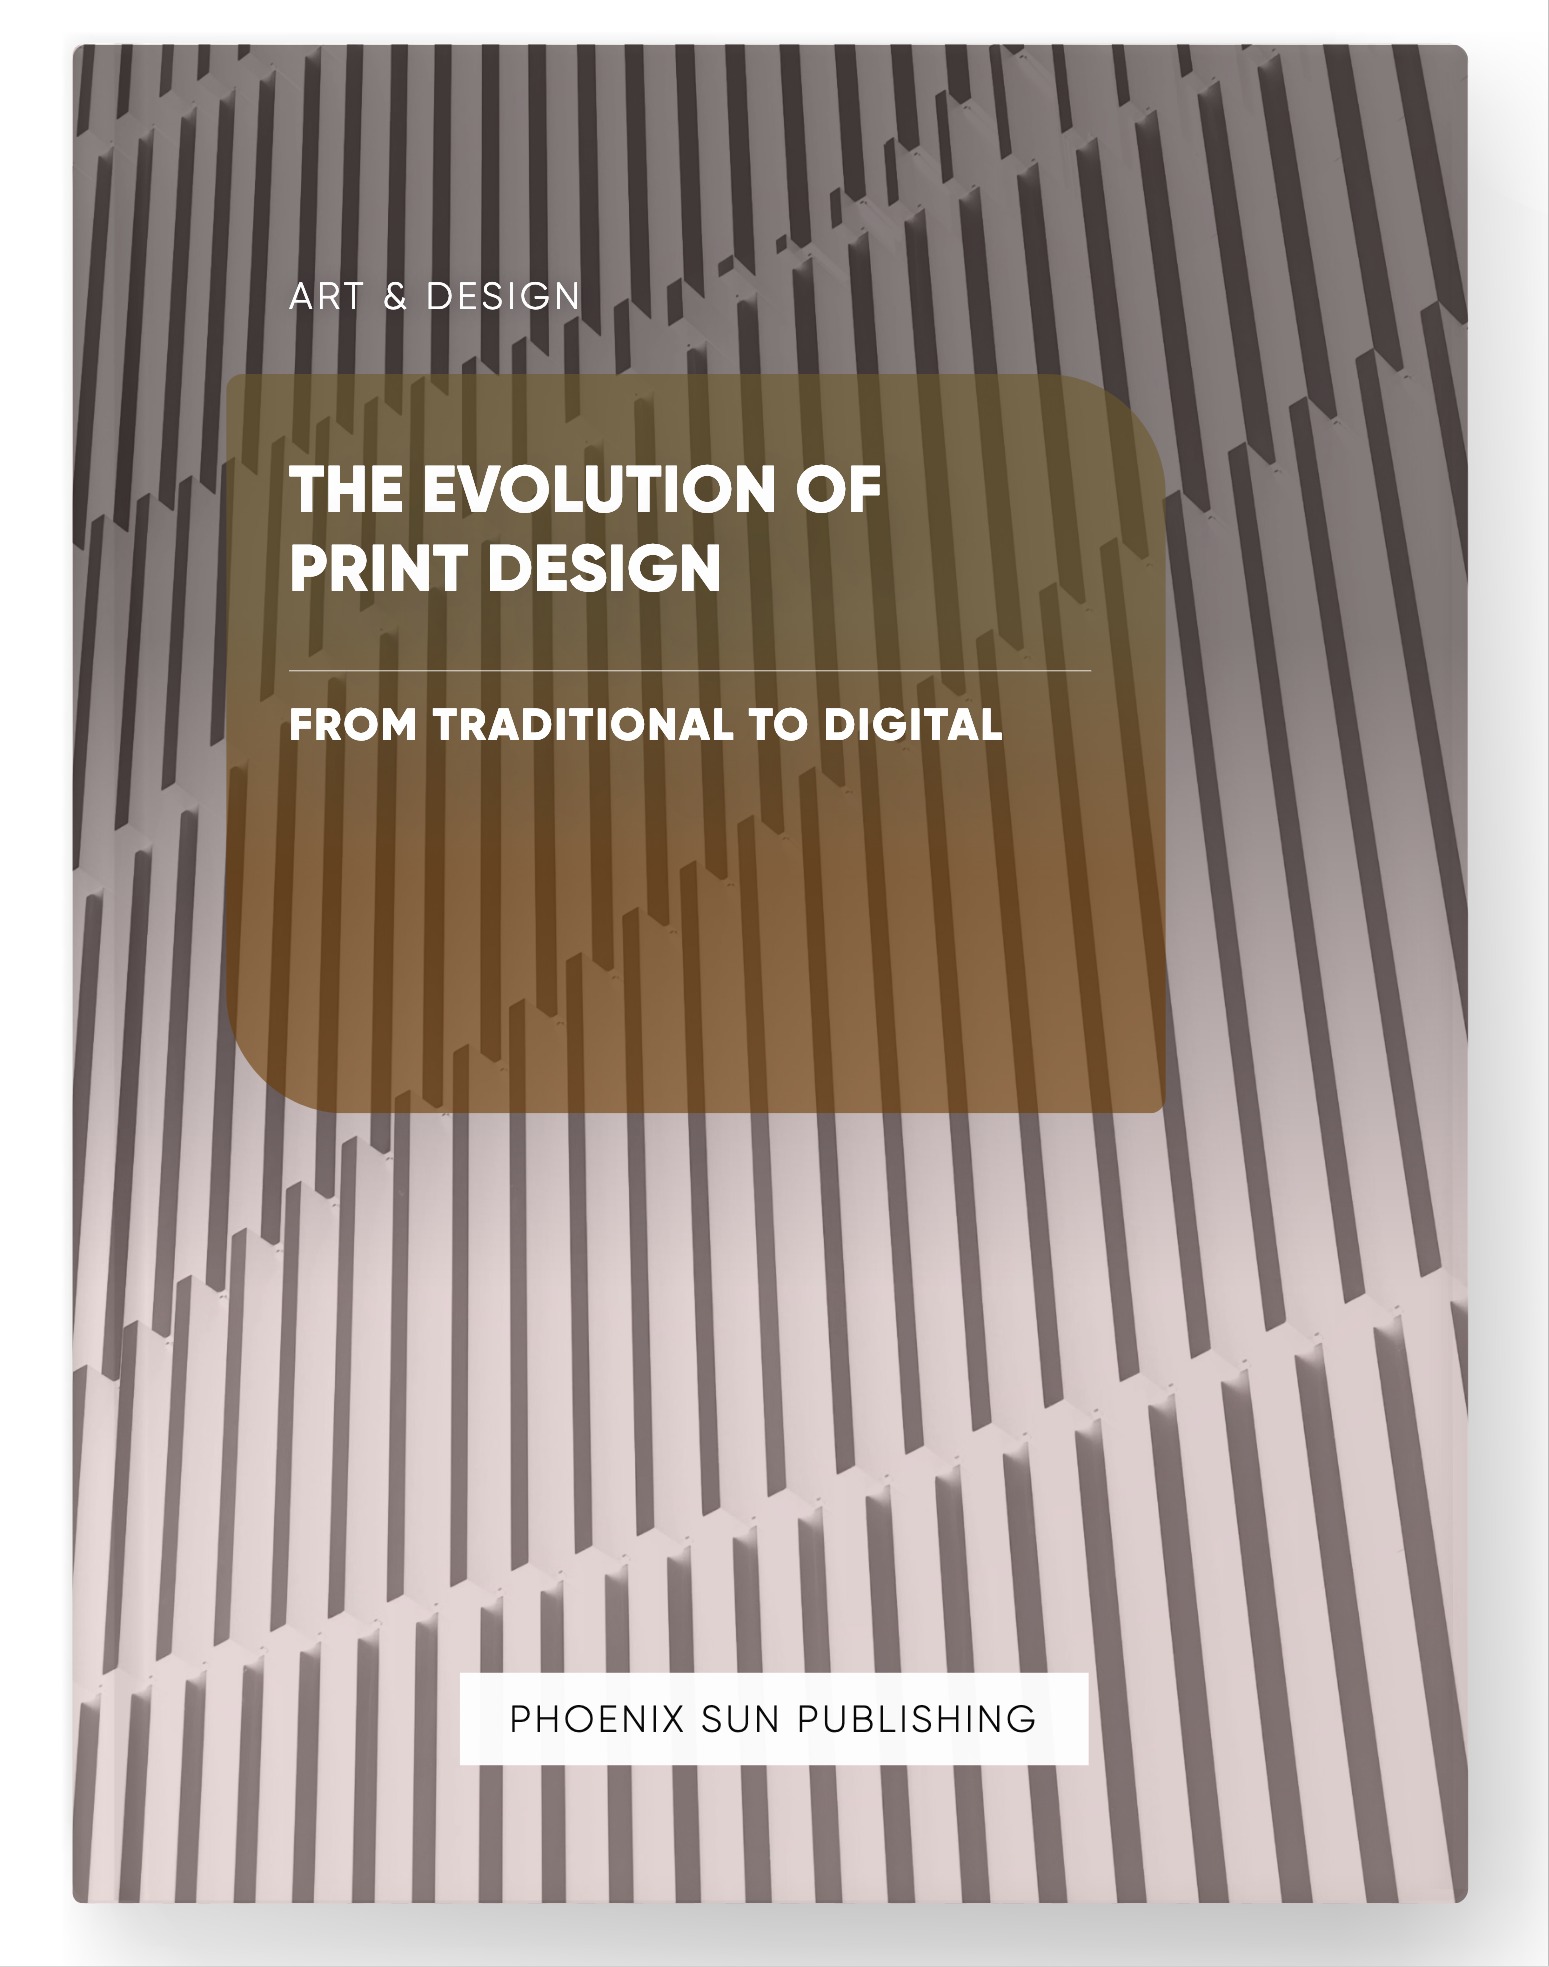 The Evolution of Print Design – From Traditional to Digital